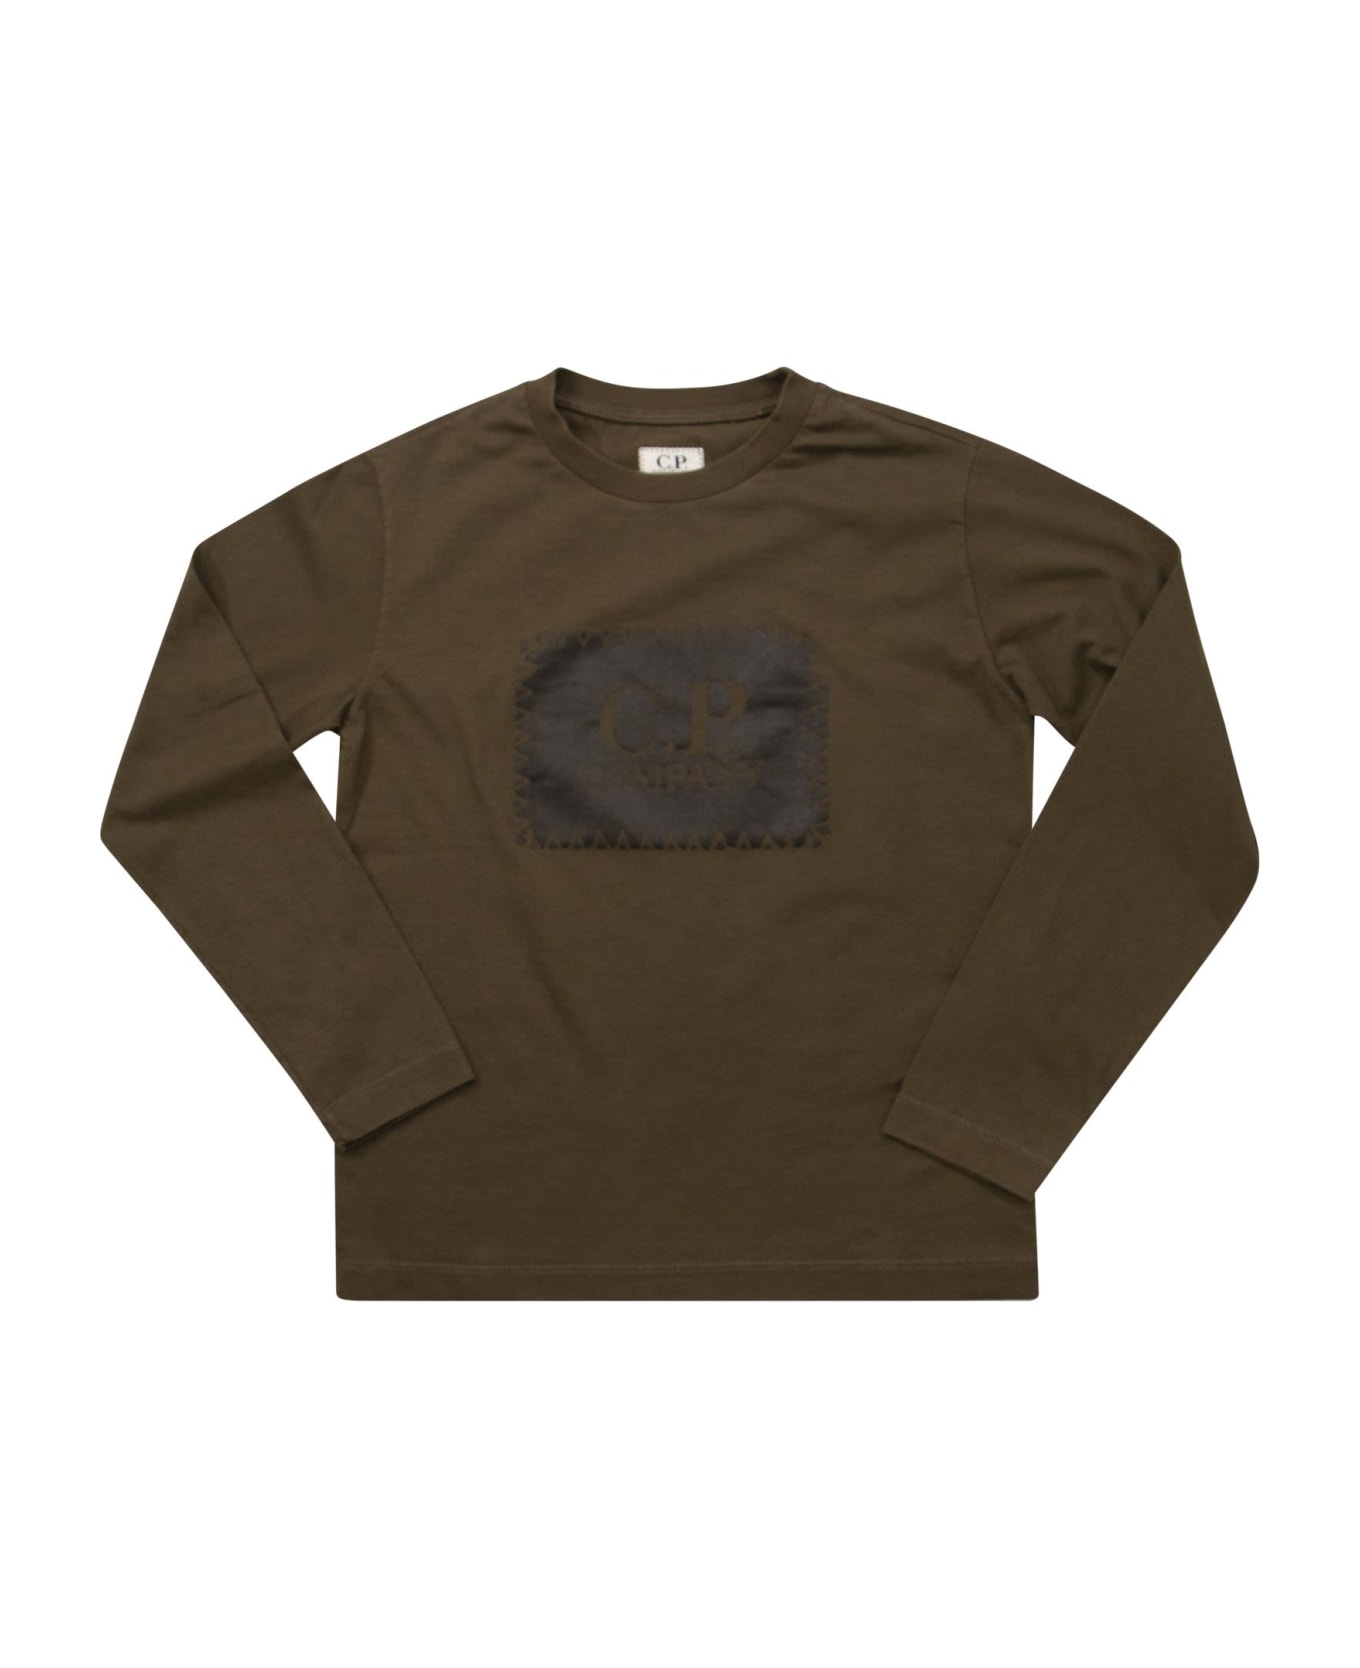 C.P. Company Logo Long Sleeved T-shirt - Forest Tシャツ＆ポロシャツ